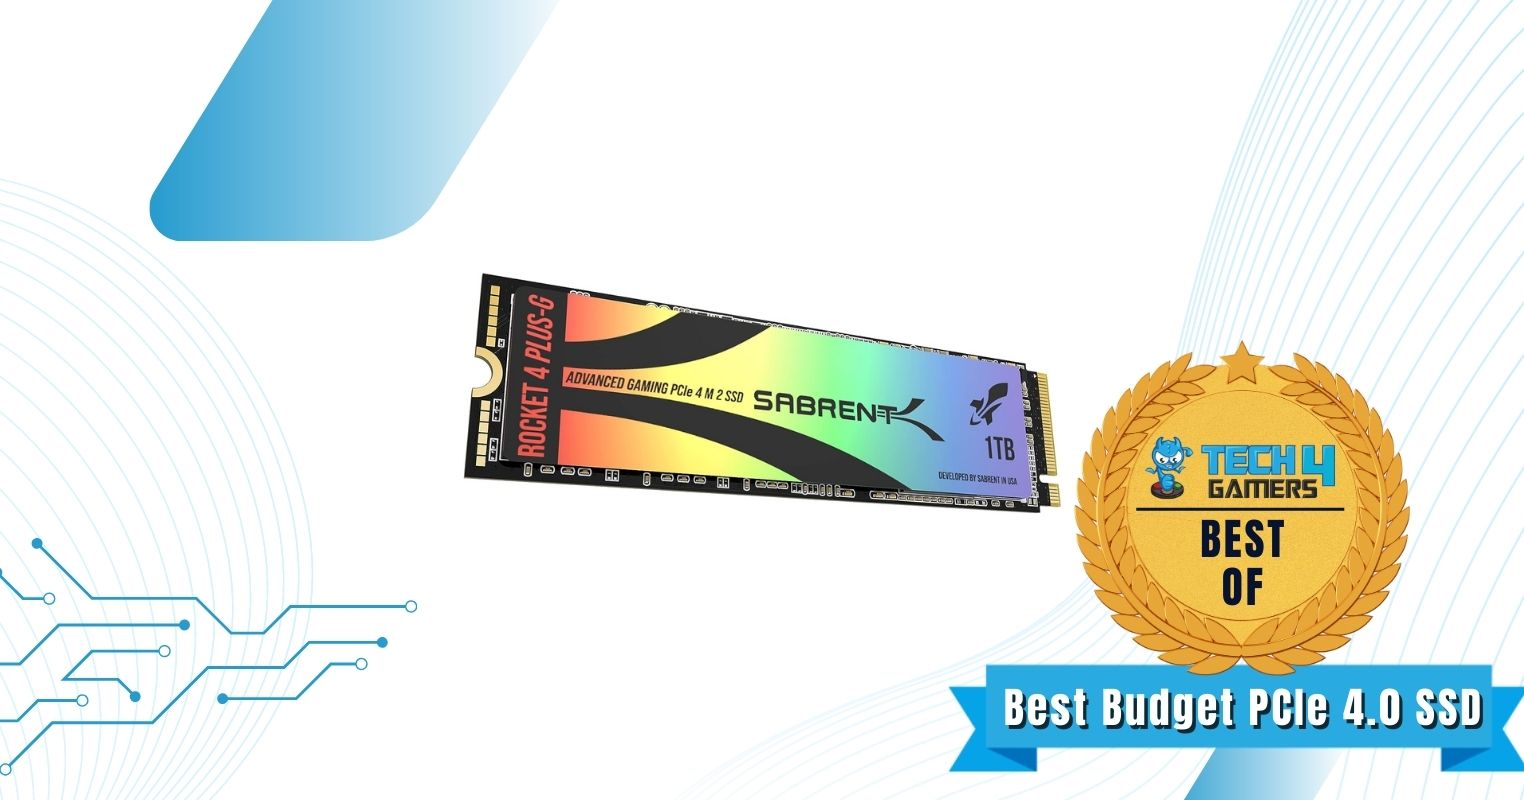 Sabrent Rocket 4 Plus-G 1TB - Best Budget PCIe 4.0 M.2 SSD For Gaming